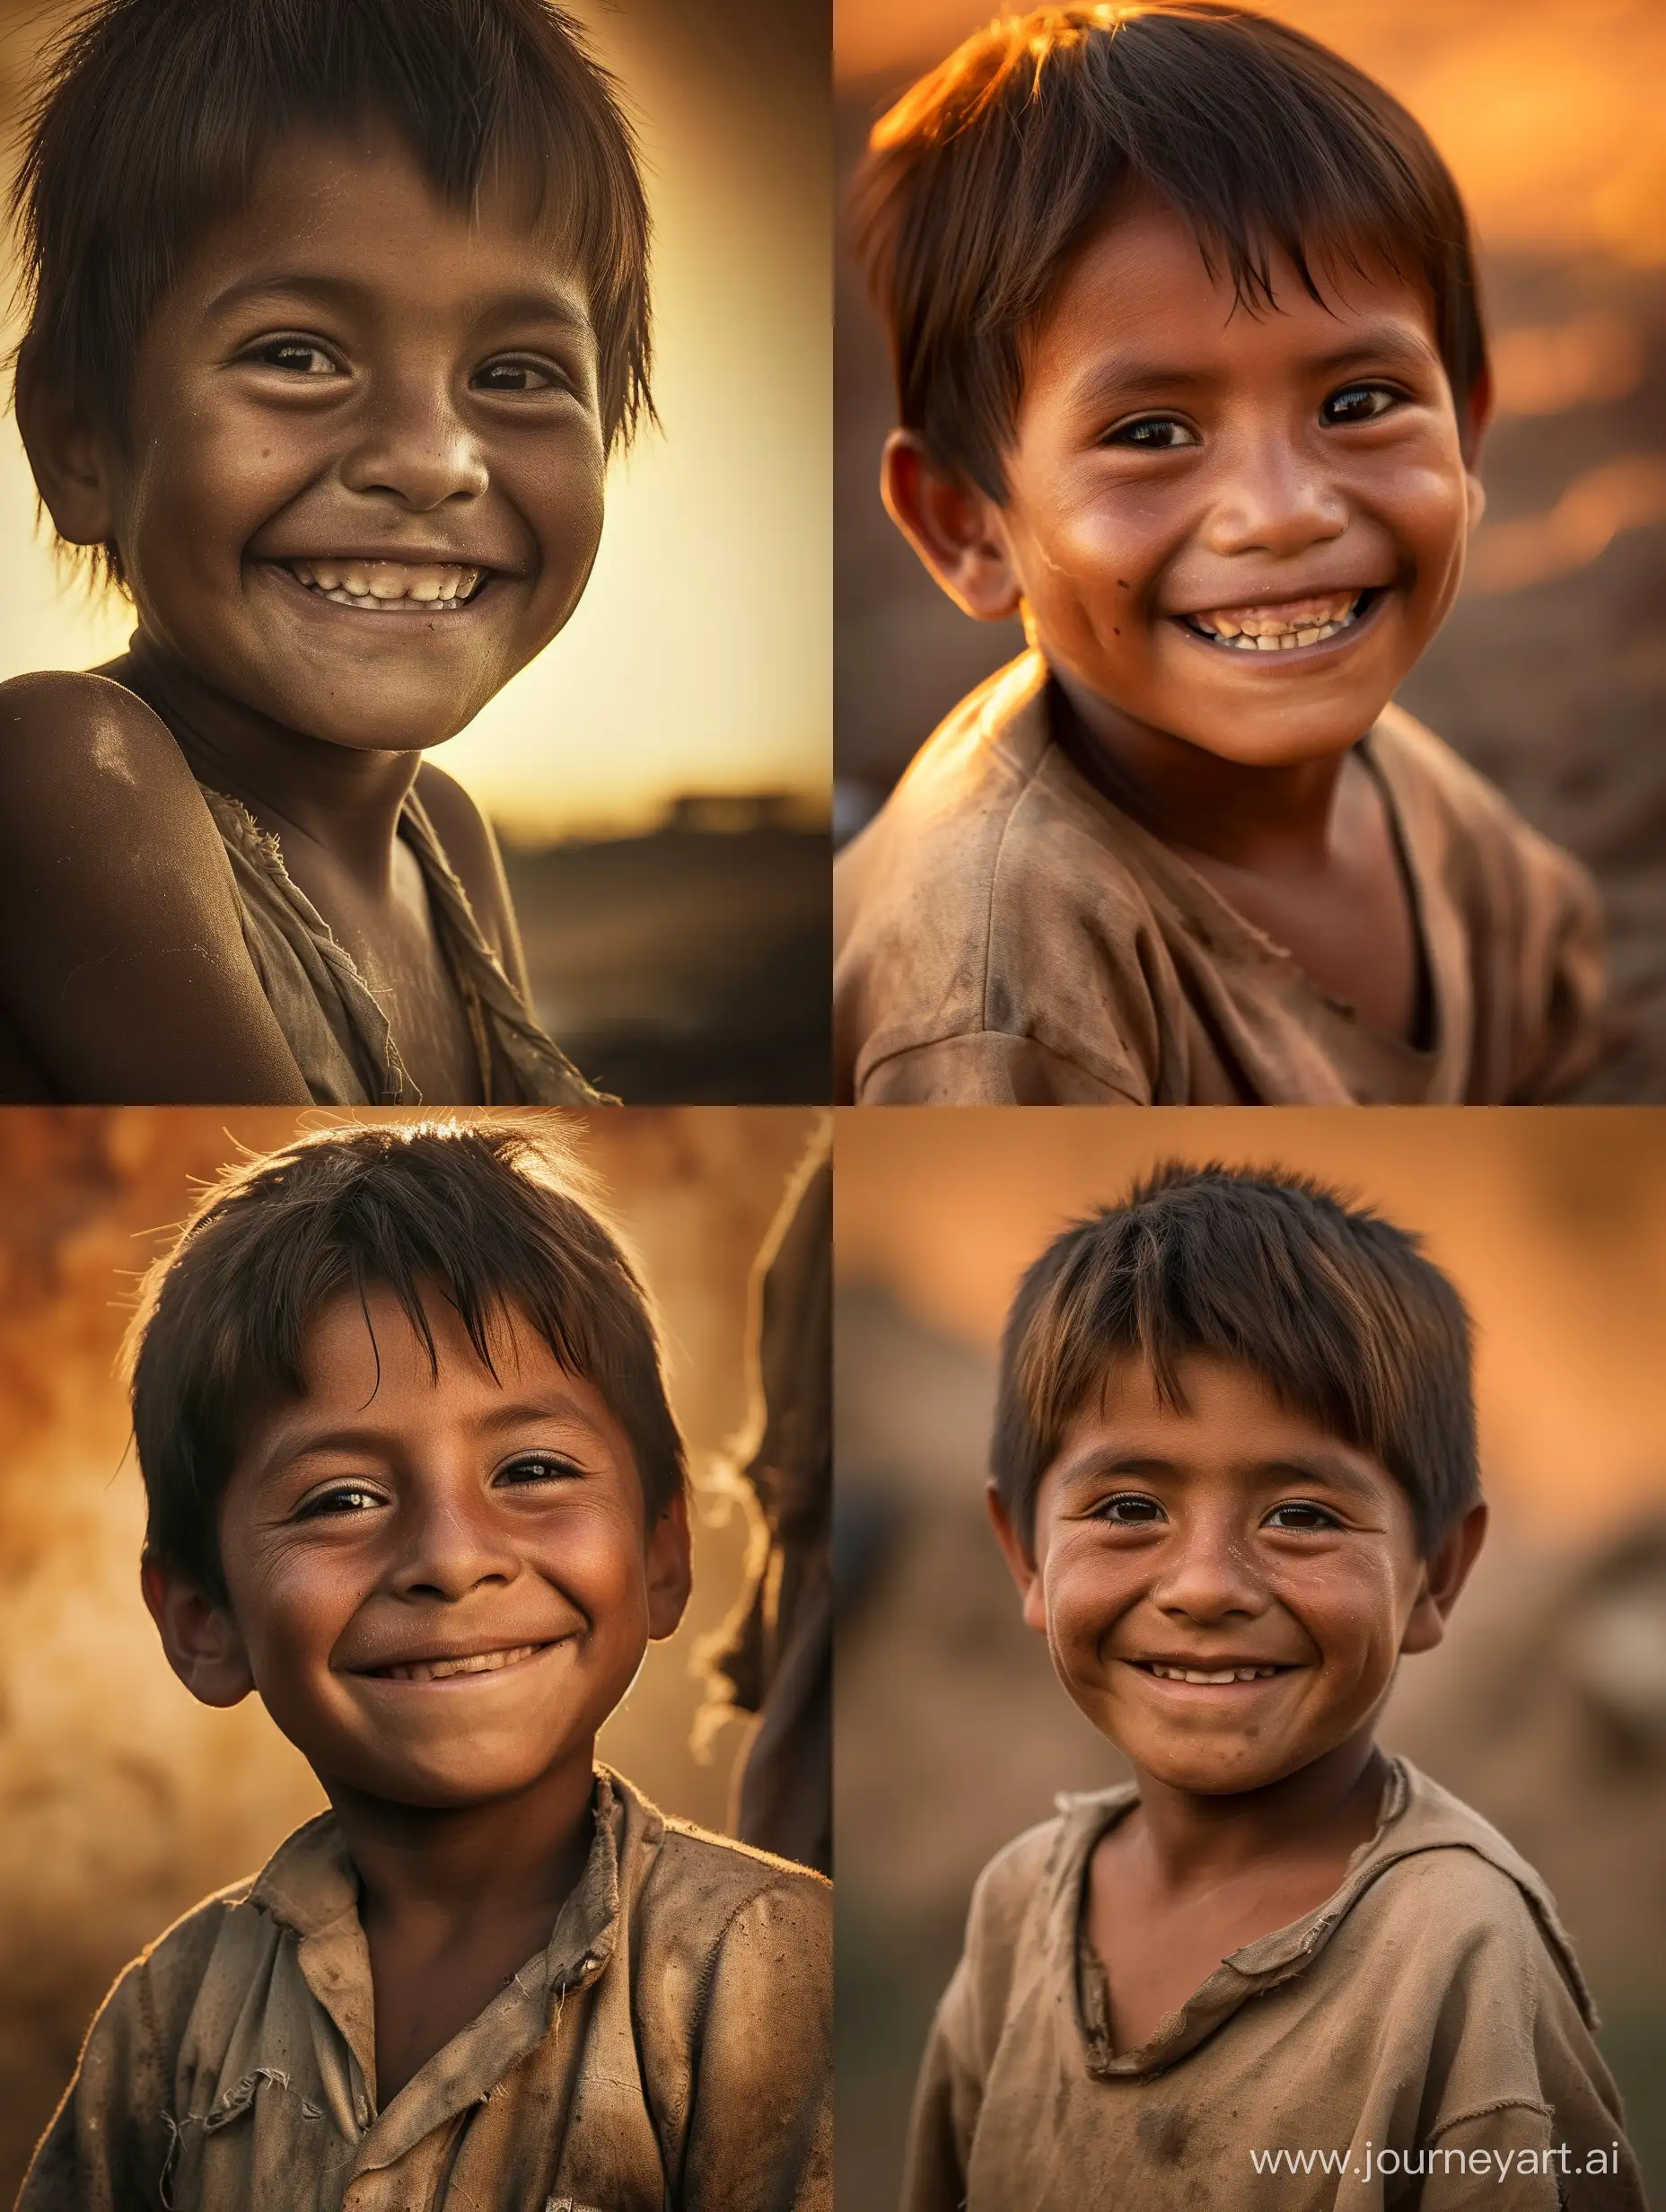 Happy-Mexican-Child-Smiling-in-PovertyStricken-Setting-at-Sunset